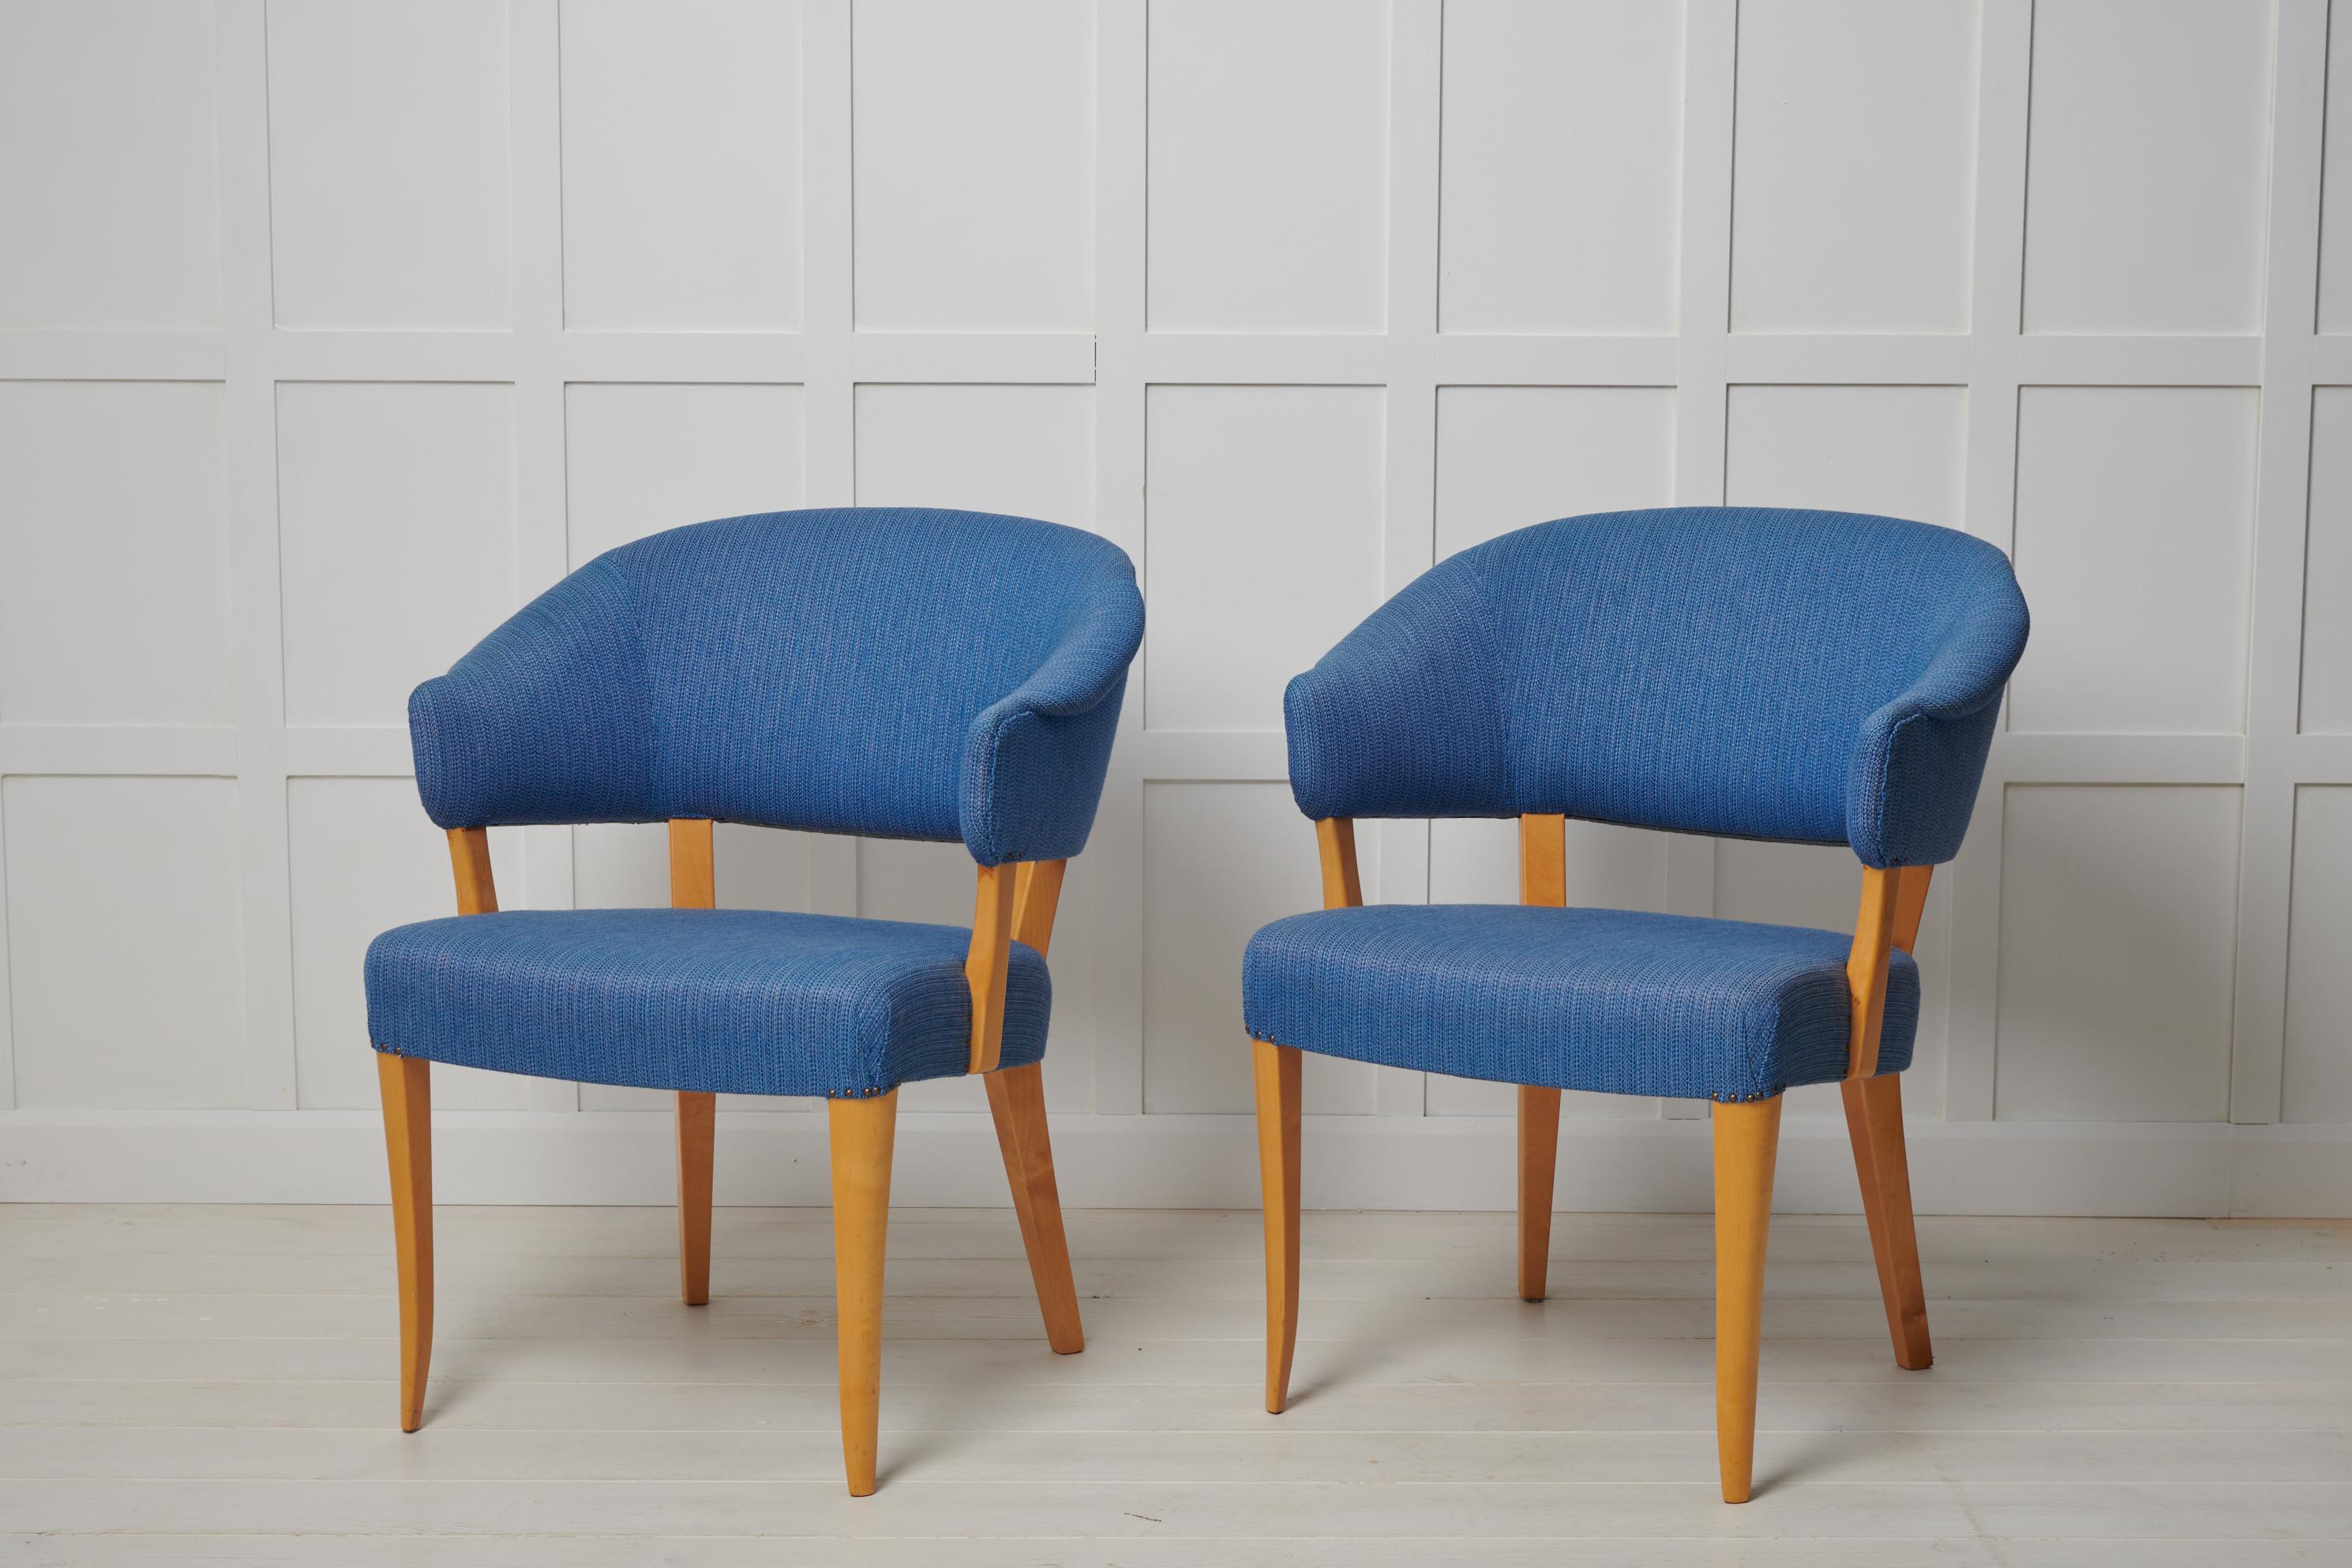 Scandinavian modern “Lata Greven” chairs designed by Carl Malmsten around 1953. This particular pair is likely made during the later years of the 1900s. Produced by O.H Sjögren. The name translates to the “lazy count” and the chairs are a classy but